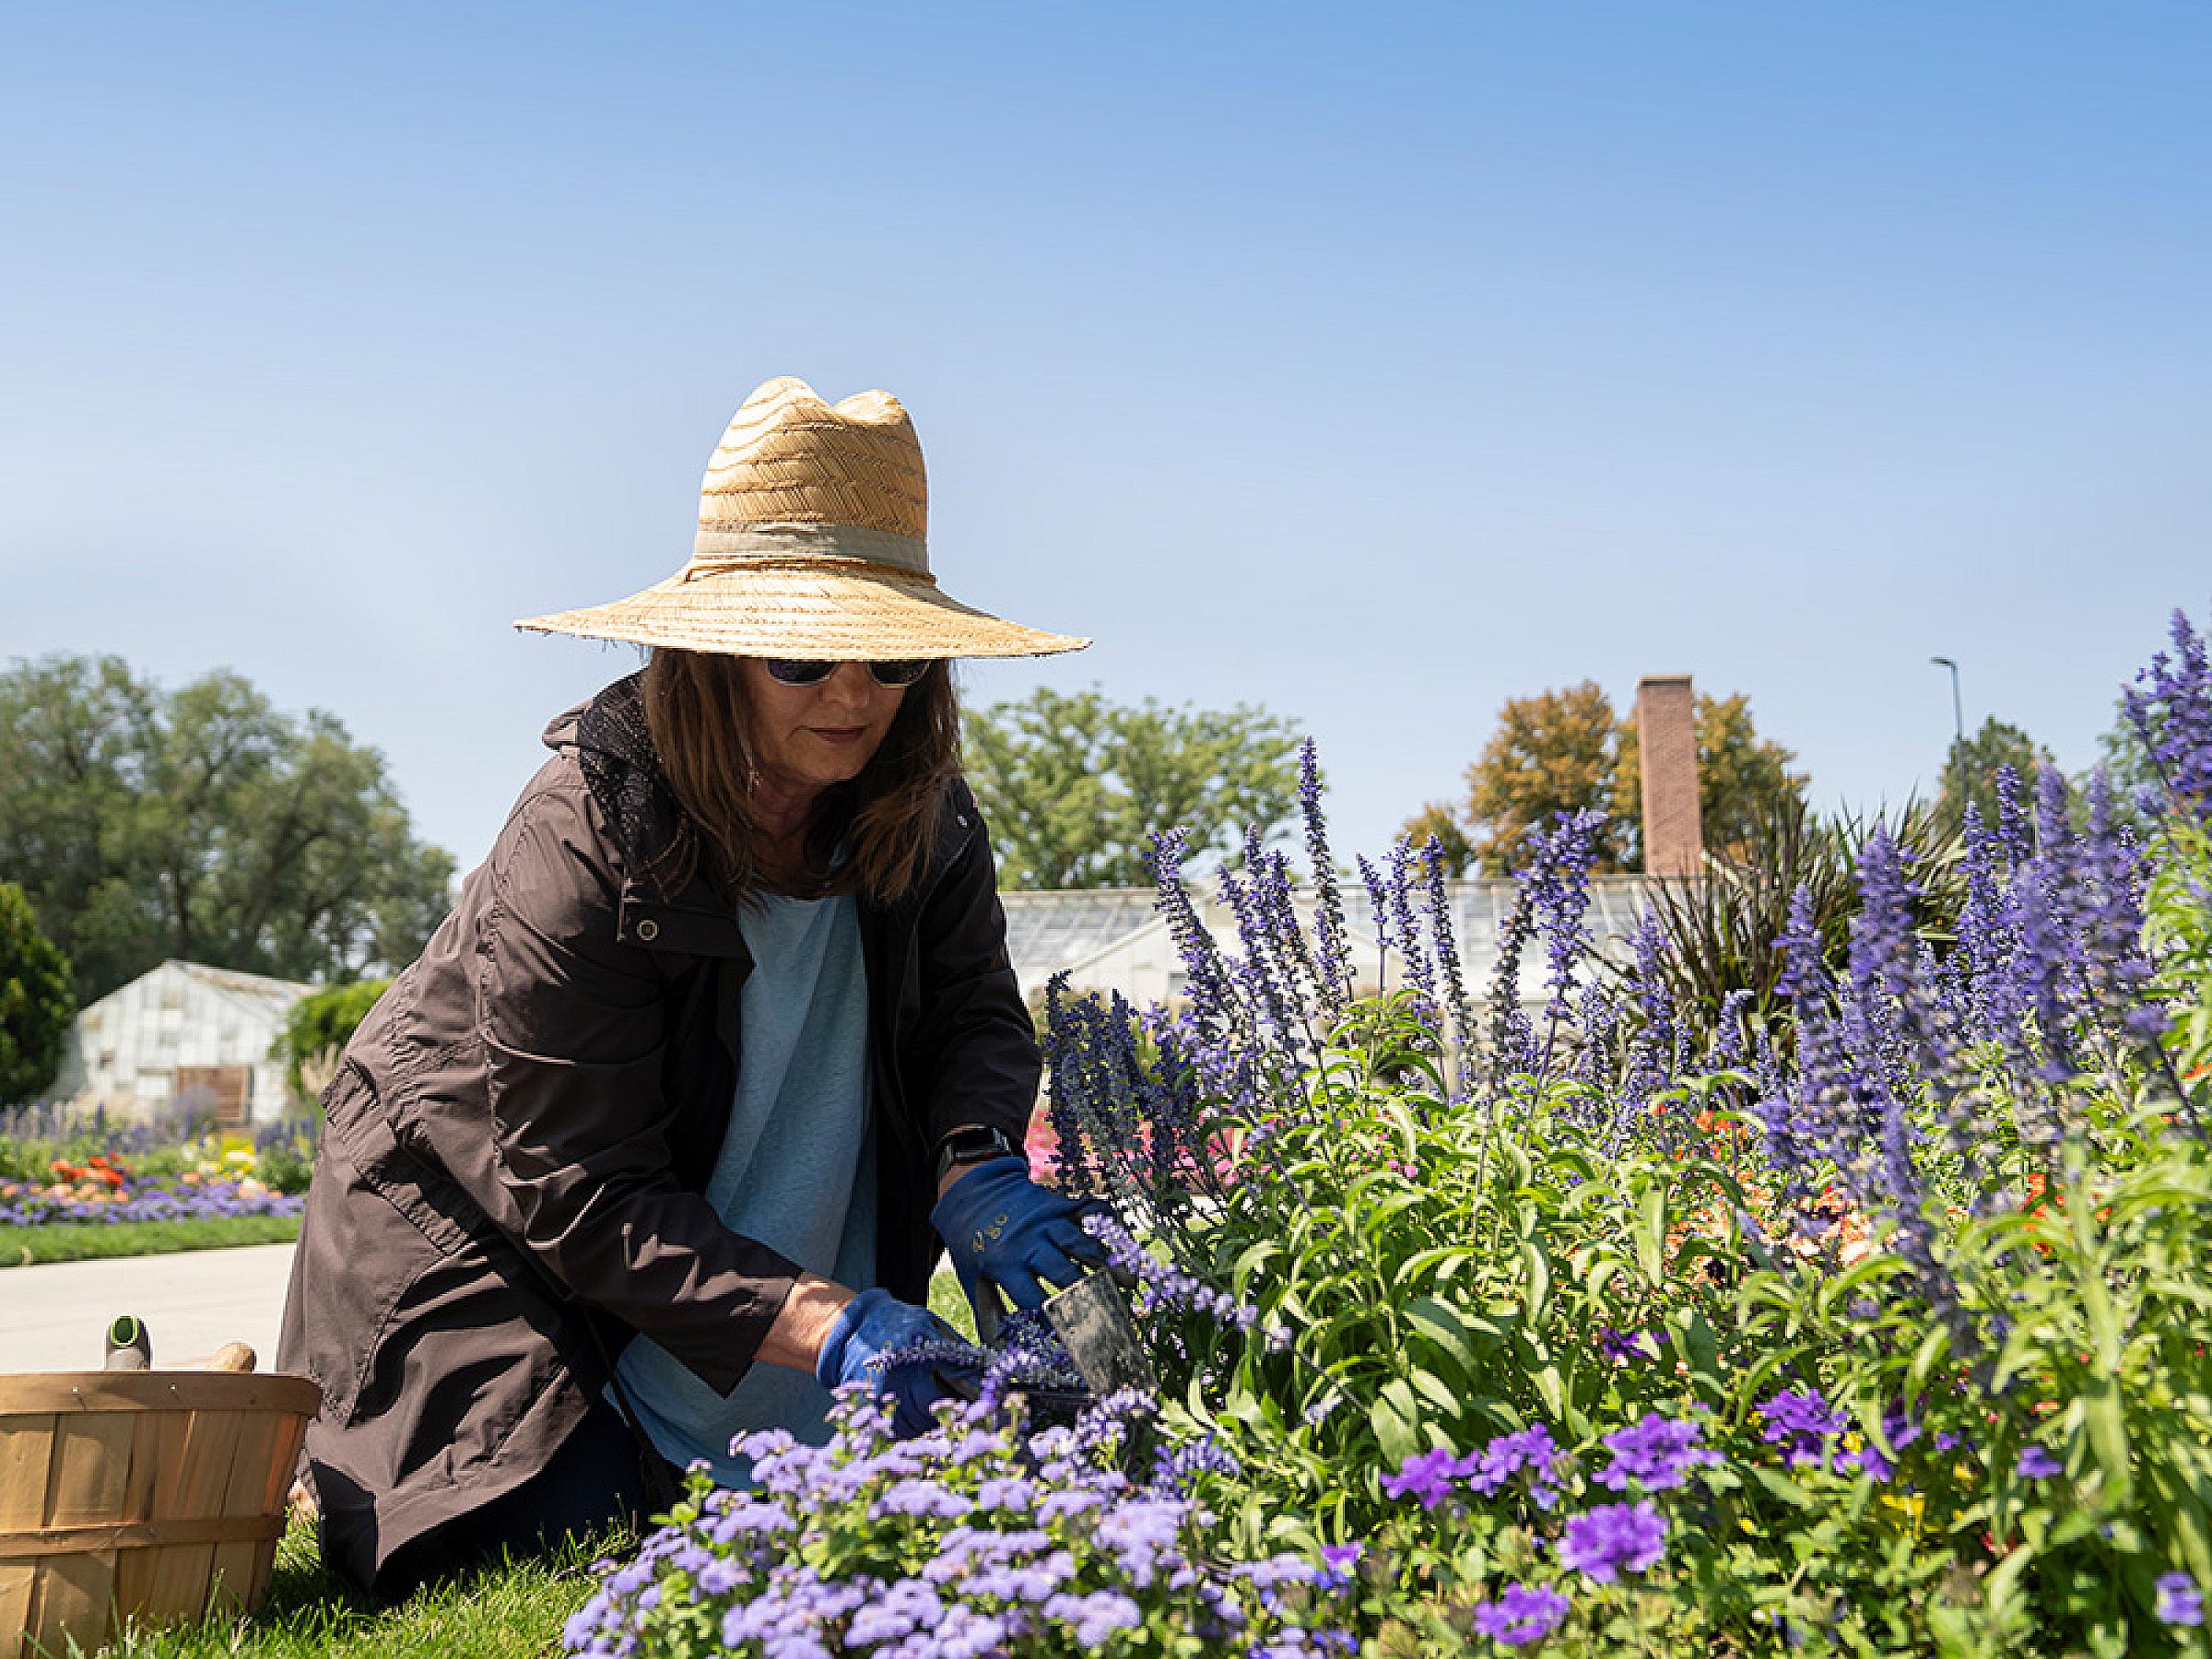 Woman wearing a large sun hat while working in her garden